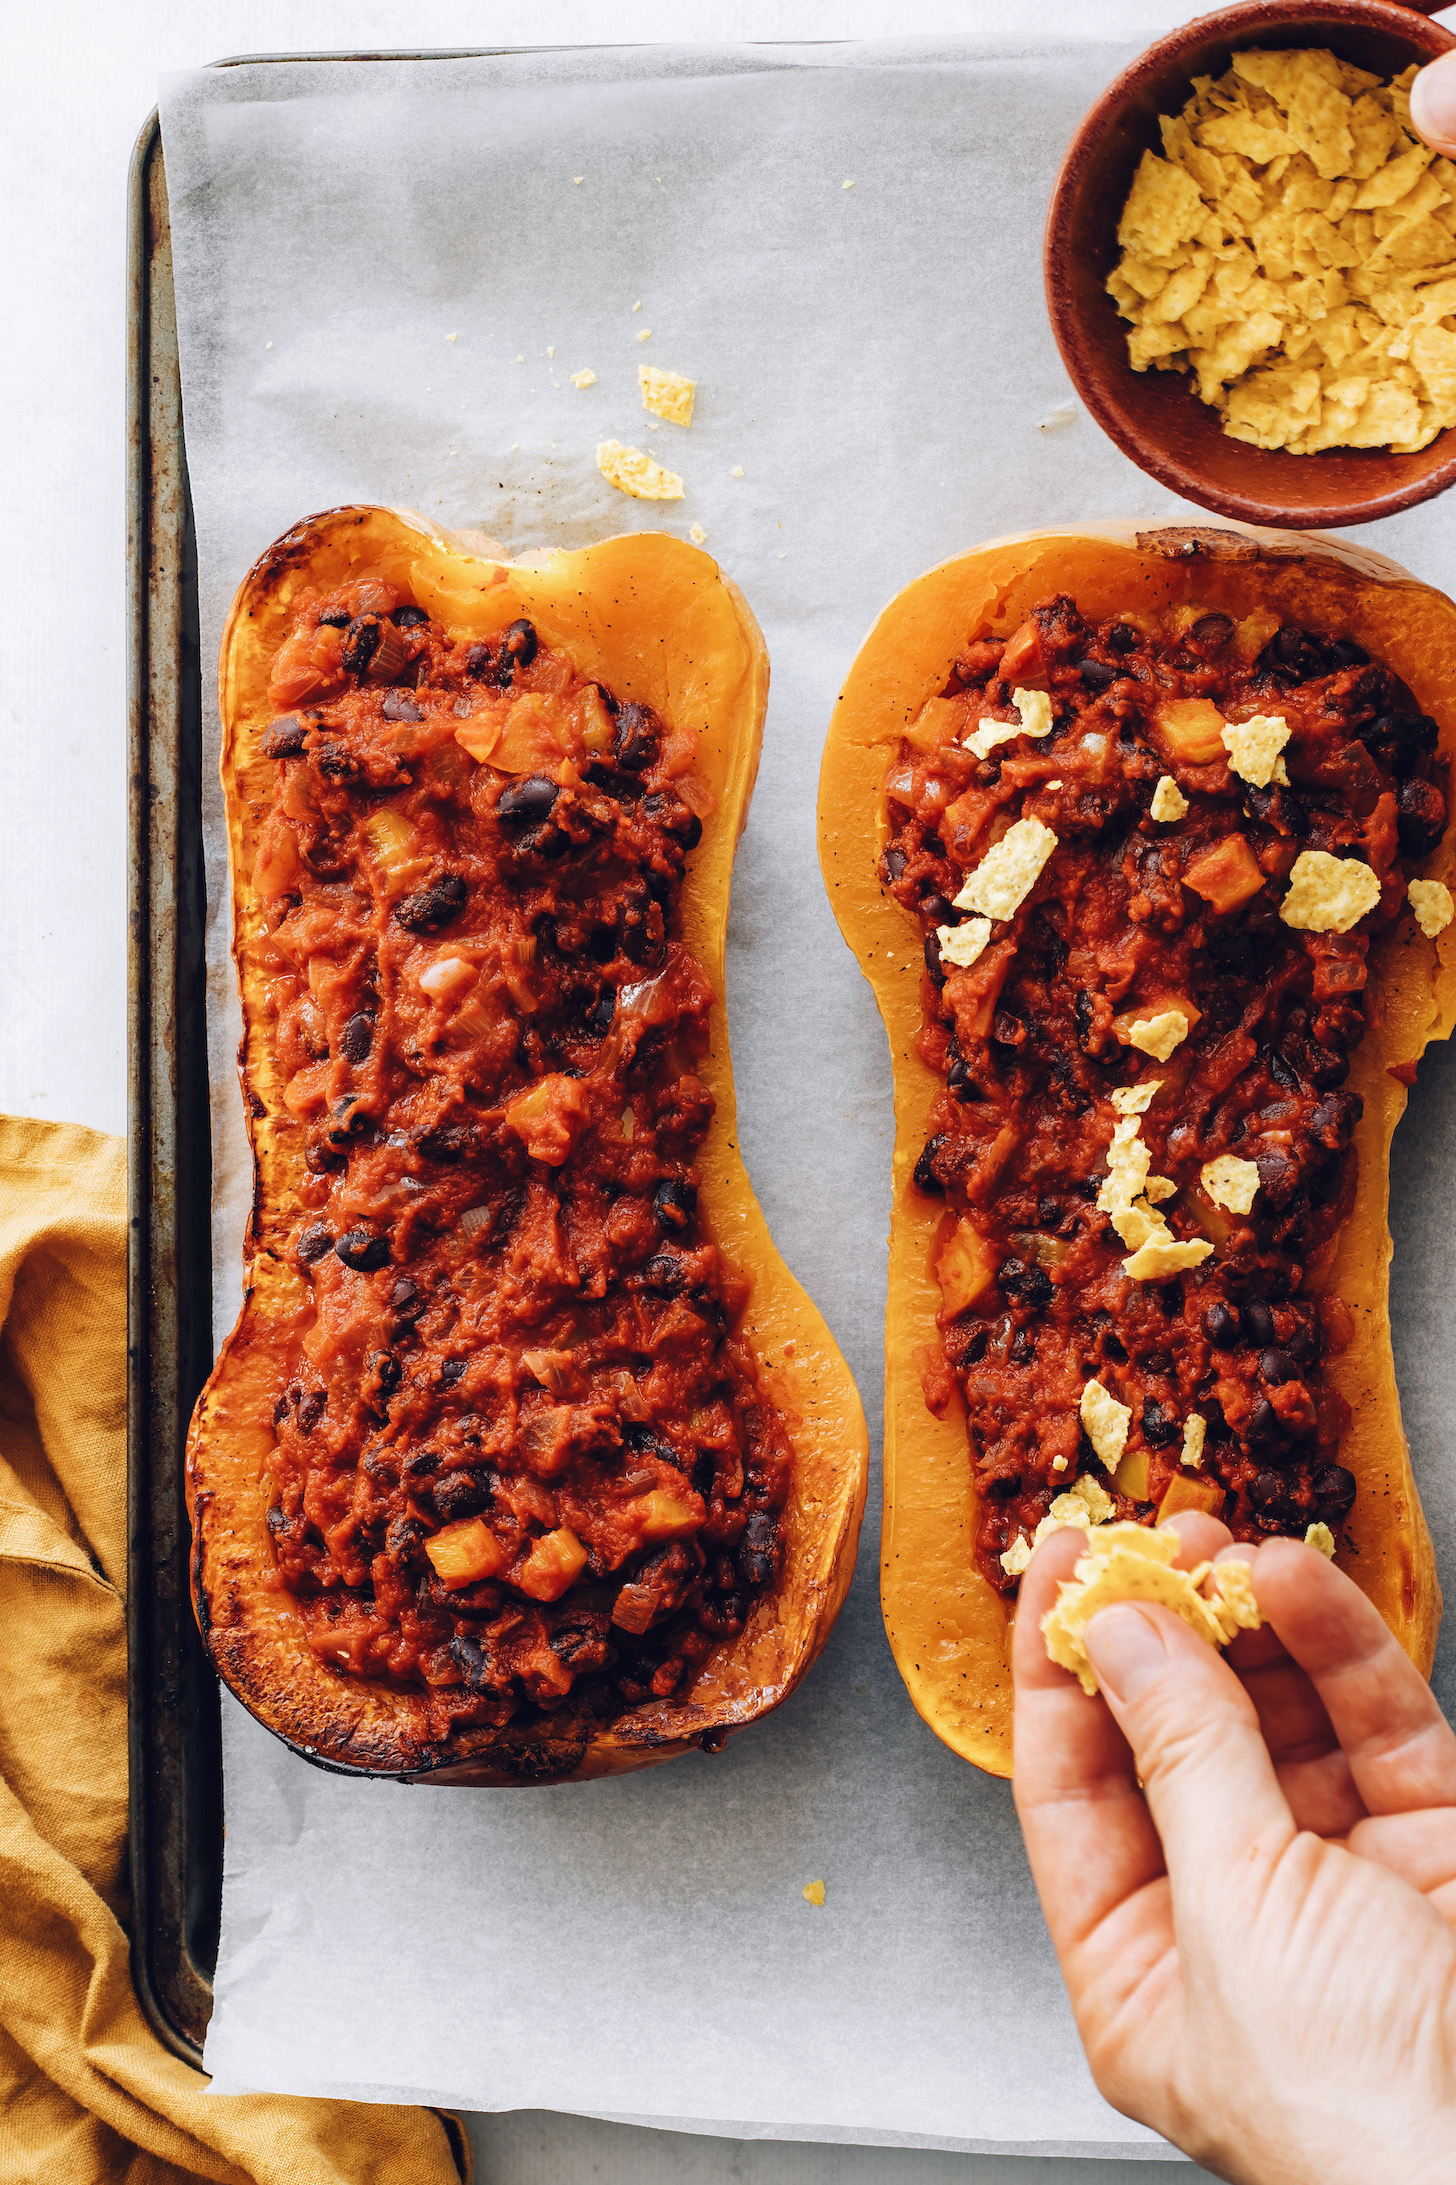 Sprinkling crushed tortilla chips over stuffed squash